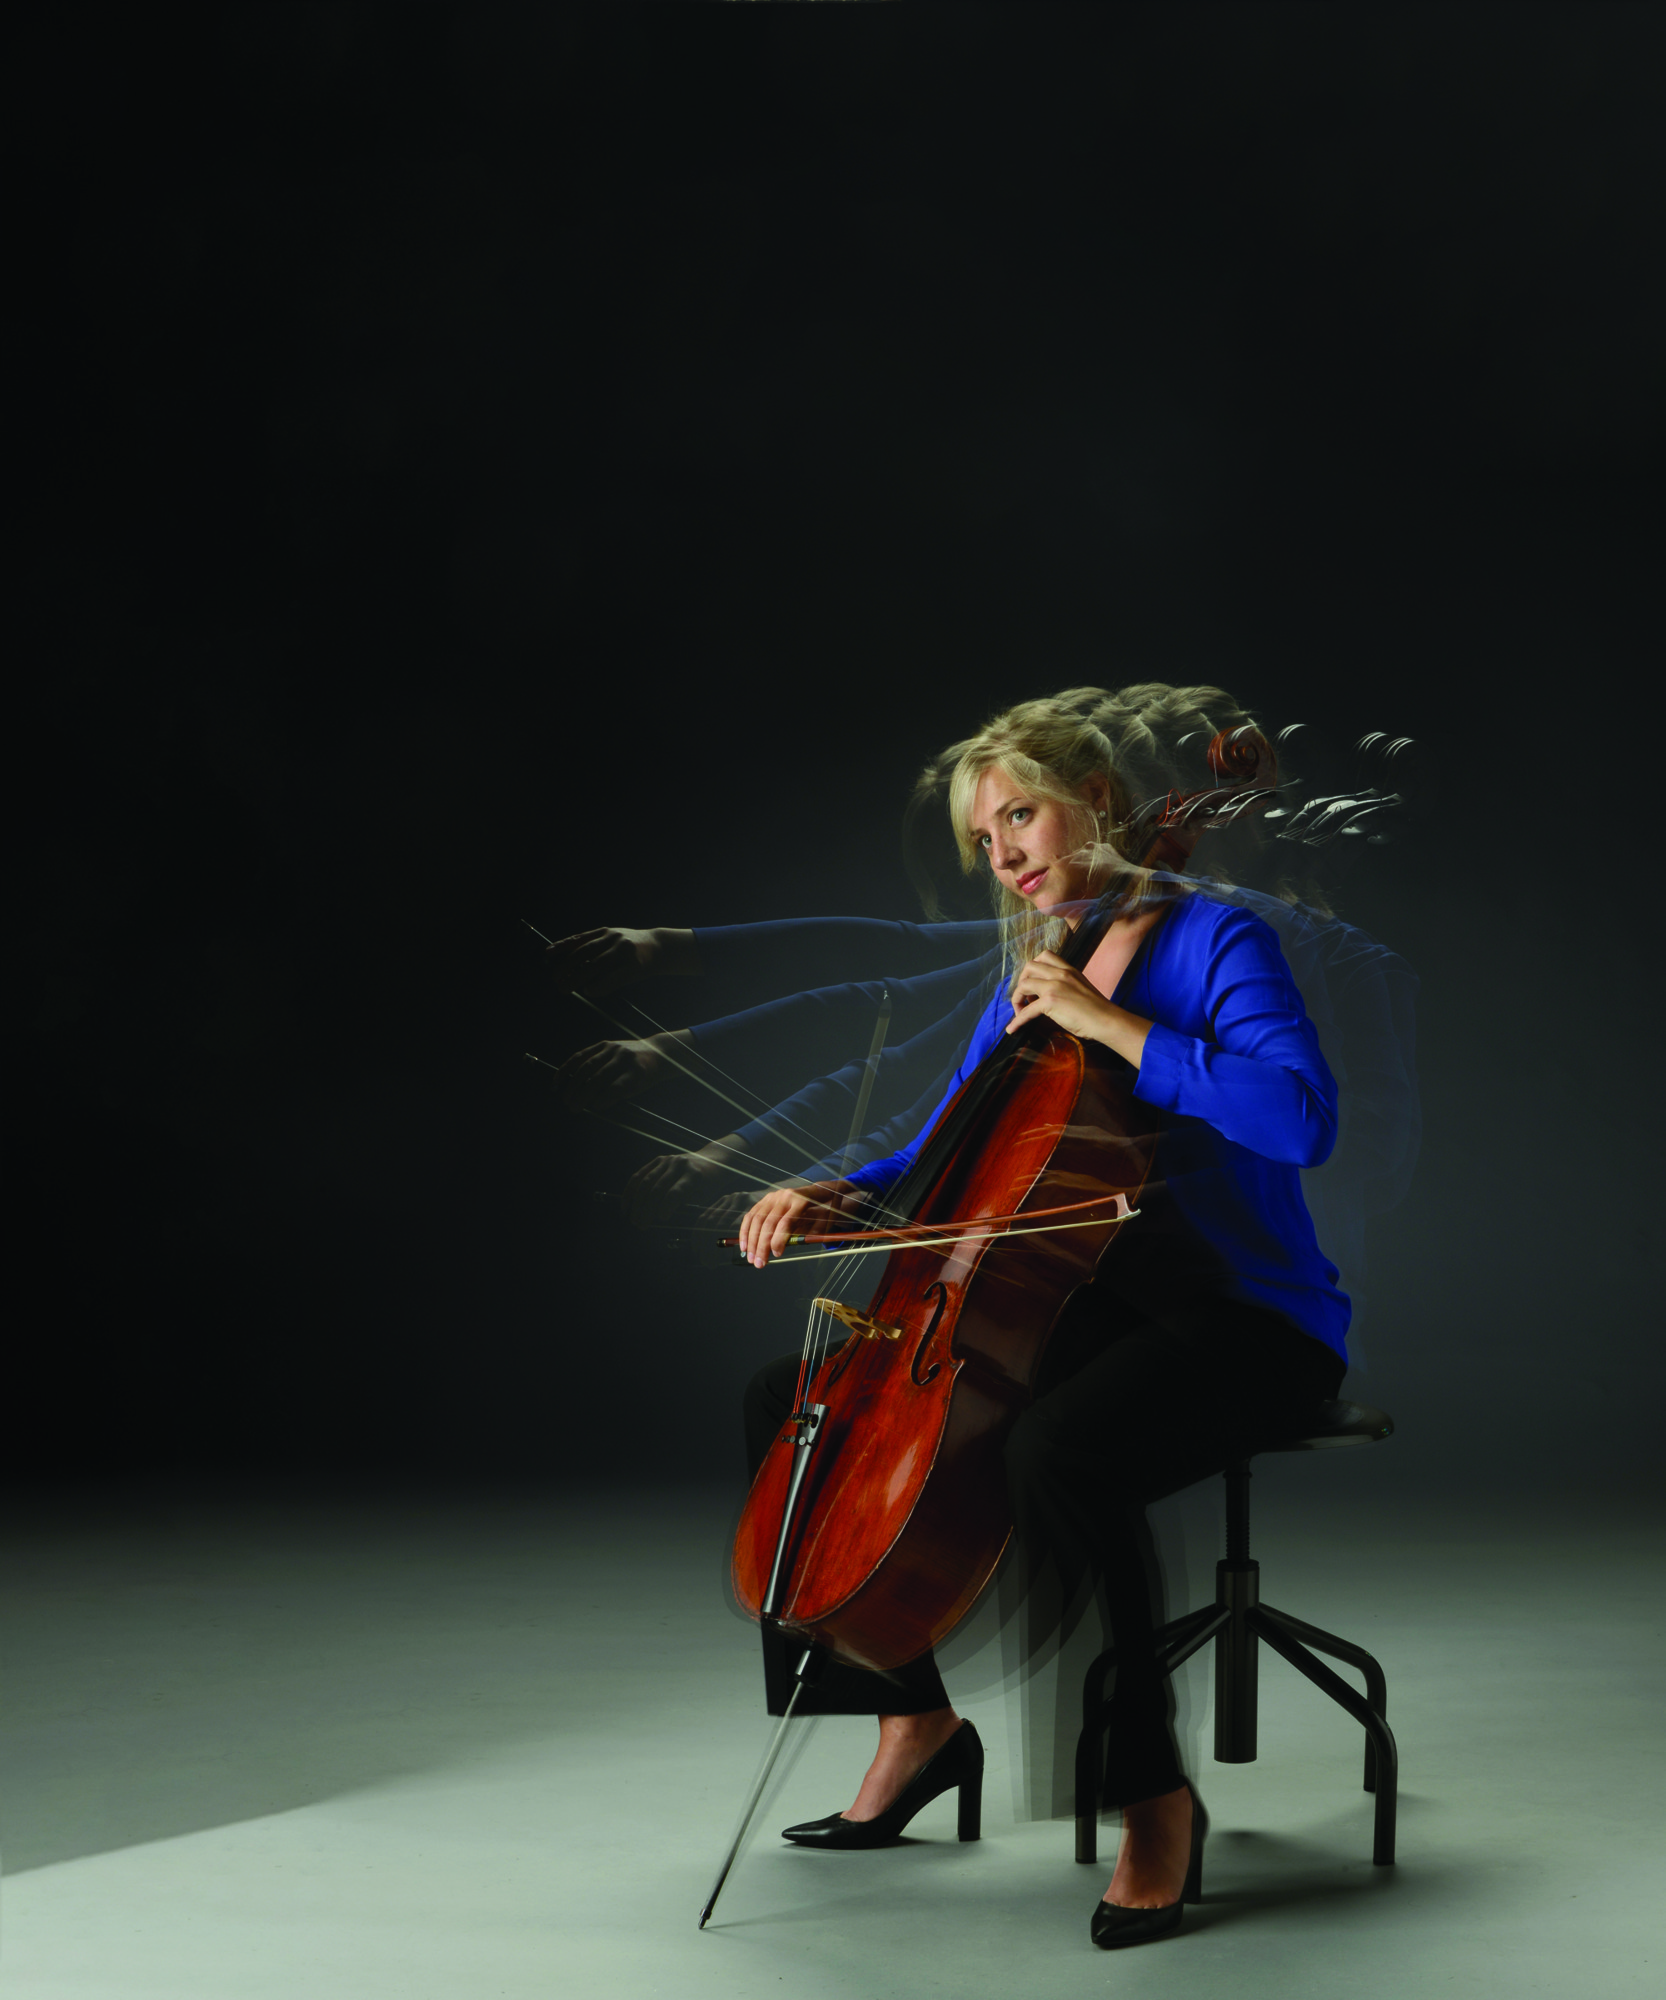 Natalie Helm, principal cellist, was featured in the concert. Courtesy image